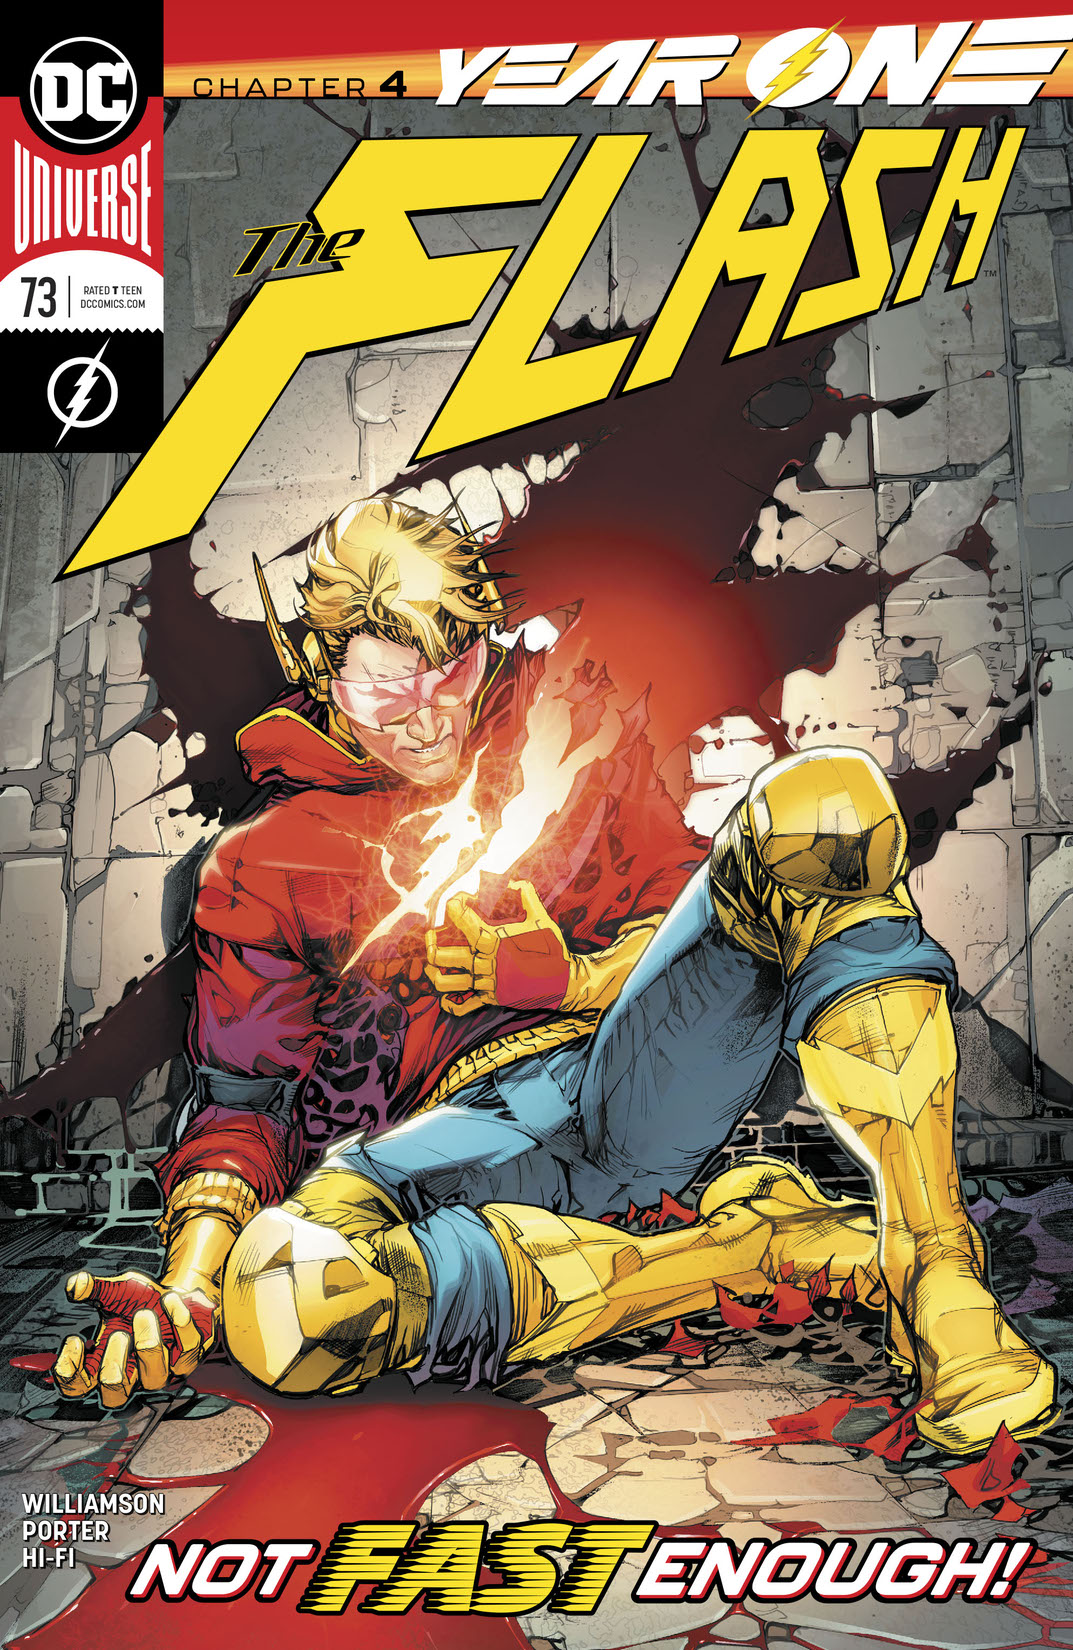 The Flash (2016-) #73 preview images